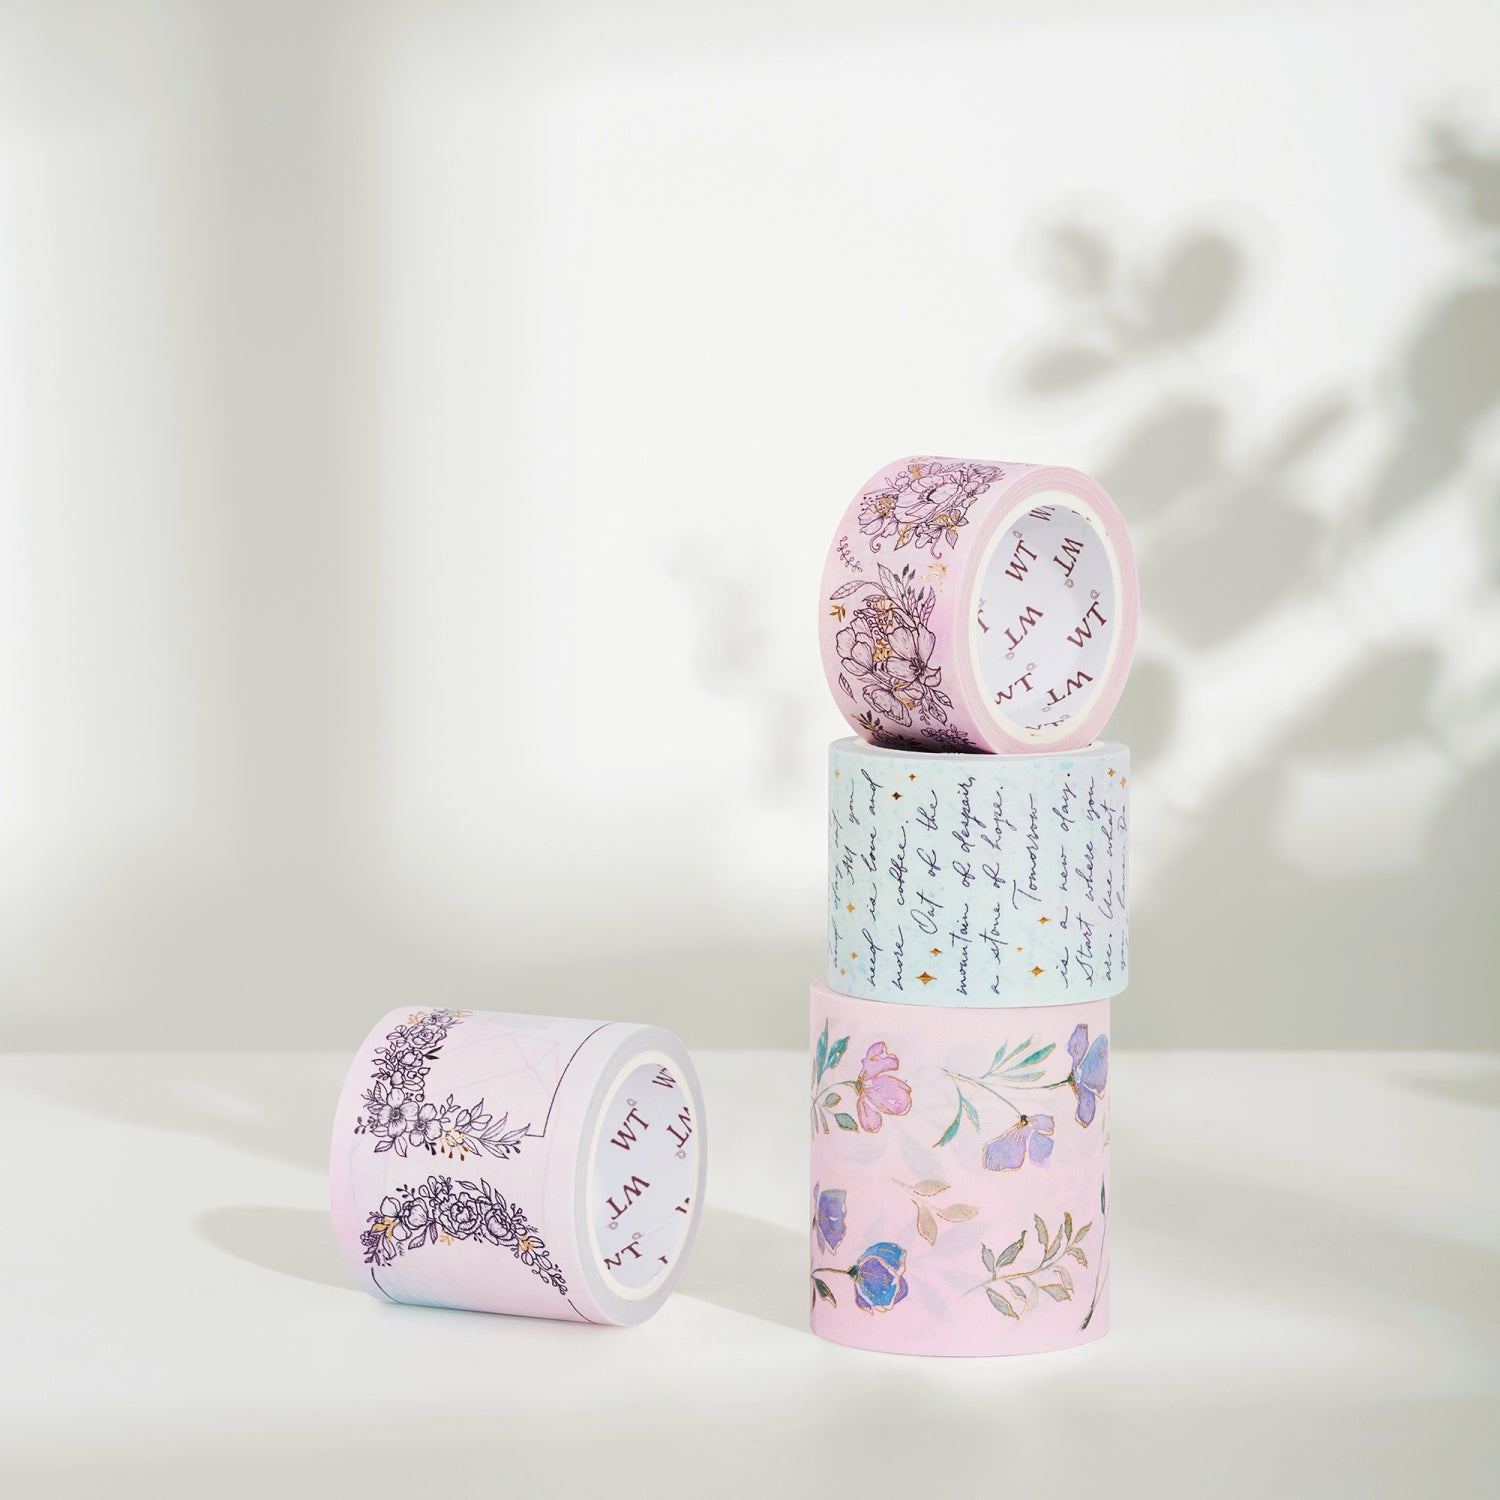 Elegant Floral Pastel Washi Tape Set | The Washi Tape Shop. Beautiful Washi and Decorative Tape For Bullet Journals, Gift Wrapping, Planner Decoration and DIY Projects